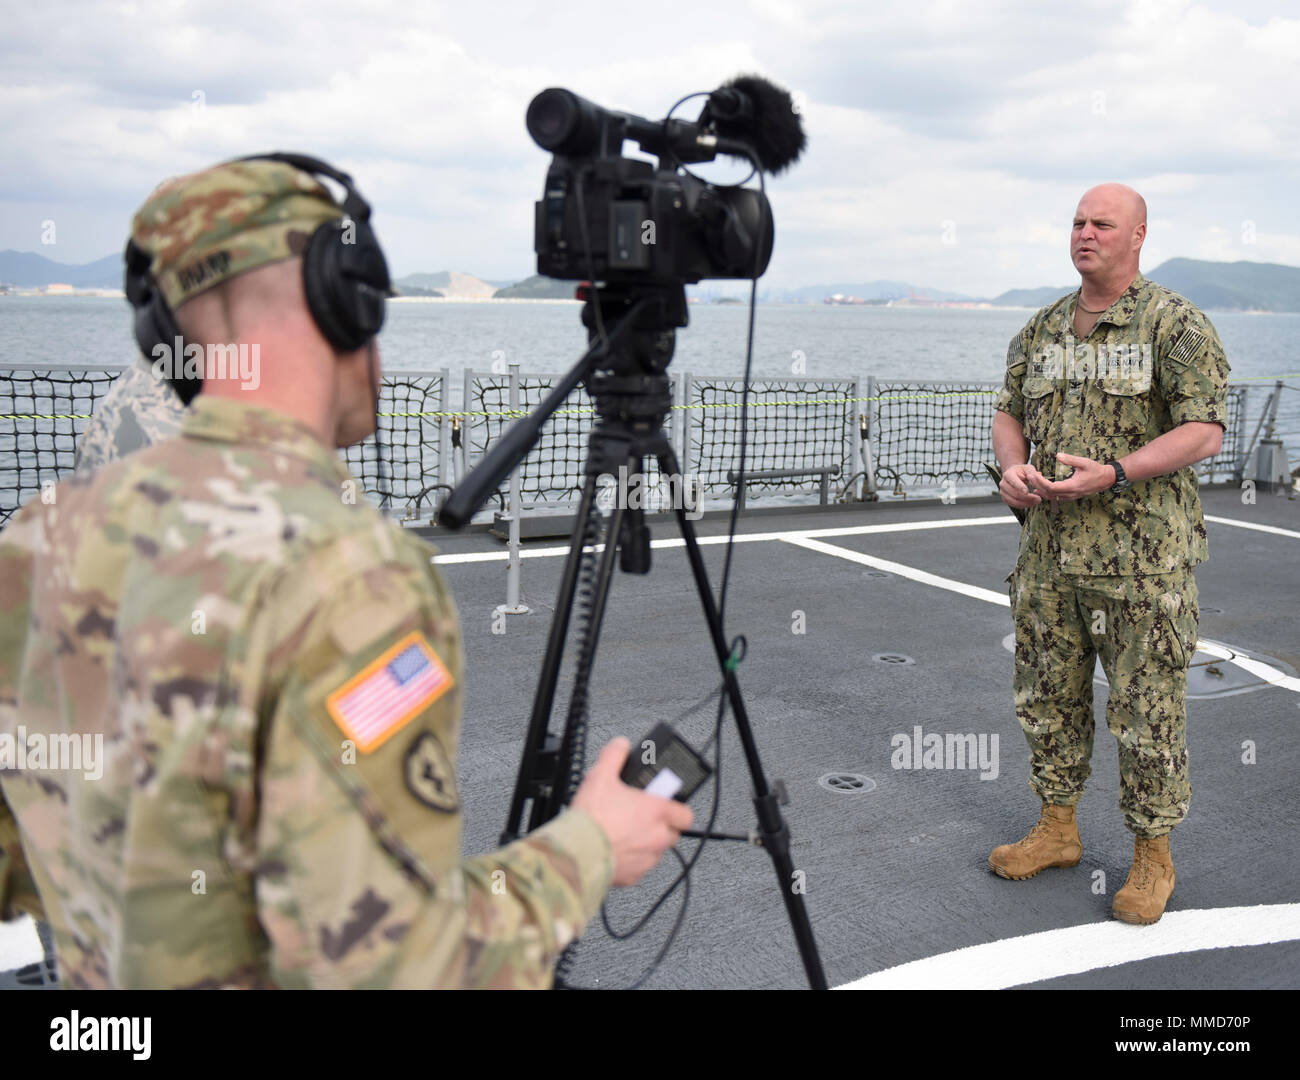 171019-N-TB148-533 BUSAN, Republic of Korea (Oct. 19, 2017) Capt. James Miller, commander, Mine Countermeasures Squadron (COMMCMRON) 7 gives an on-camera interview for soldiers from the Armed Forces Network (AFN) aboard the ROKS Cheong Wang Bong (LST 686) during the annual Multinational Mine Warfare Exercise (MN MIWEX). MN MIWEX is a mine countermeasures exercise between the U.S., Republic of Korea, and U.N. Command Sending States meant to increase combined capabilities and readiness to respond to any contingency on the Korean peninsula. (U.S. Navy photo by Mass Communication Specialist Seaman Stock Photo